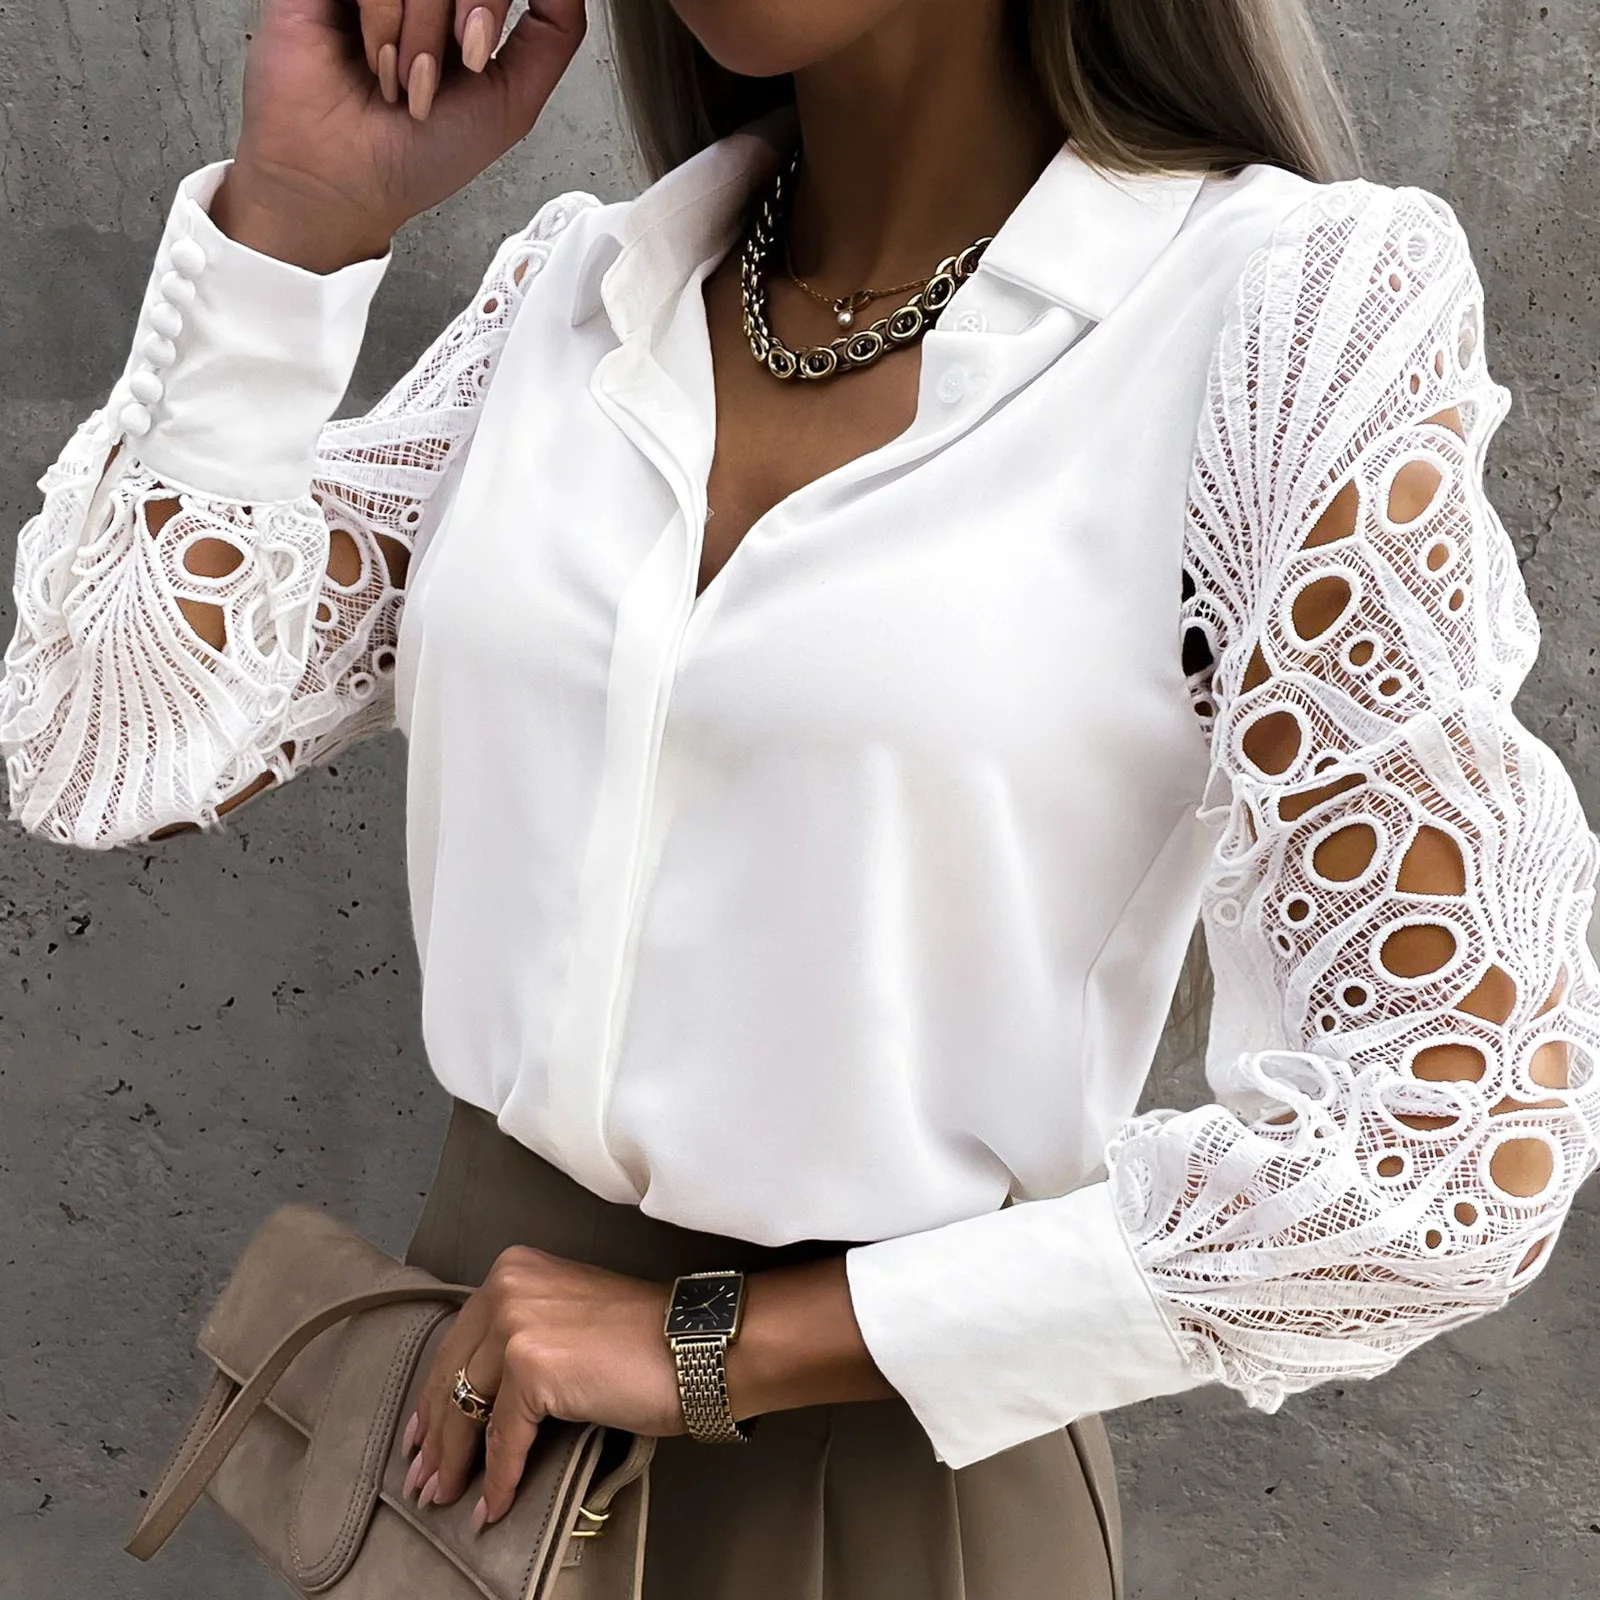 

Women's Long-Sleeved V-Neck Blouse Solid Color Hollow Lace Design Blouse Tops for Shopping Walking Outfit